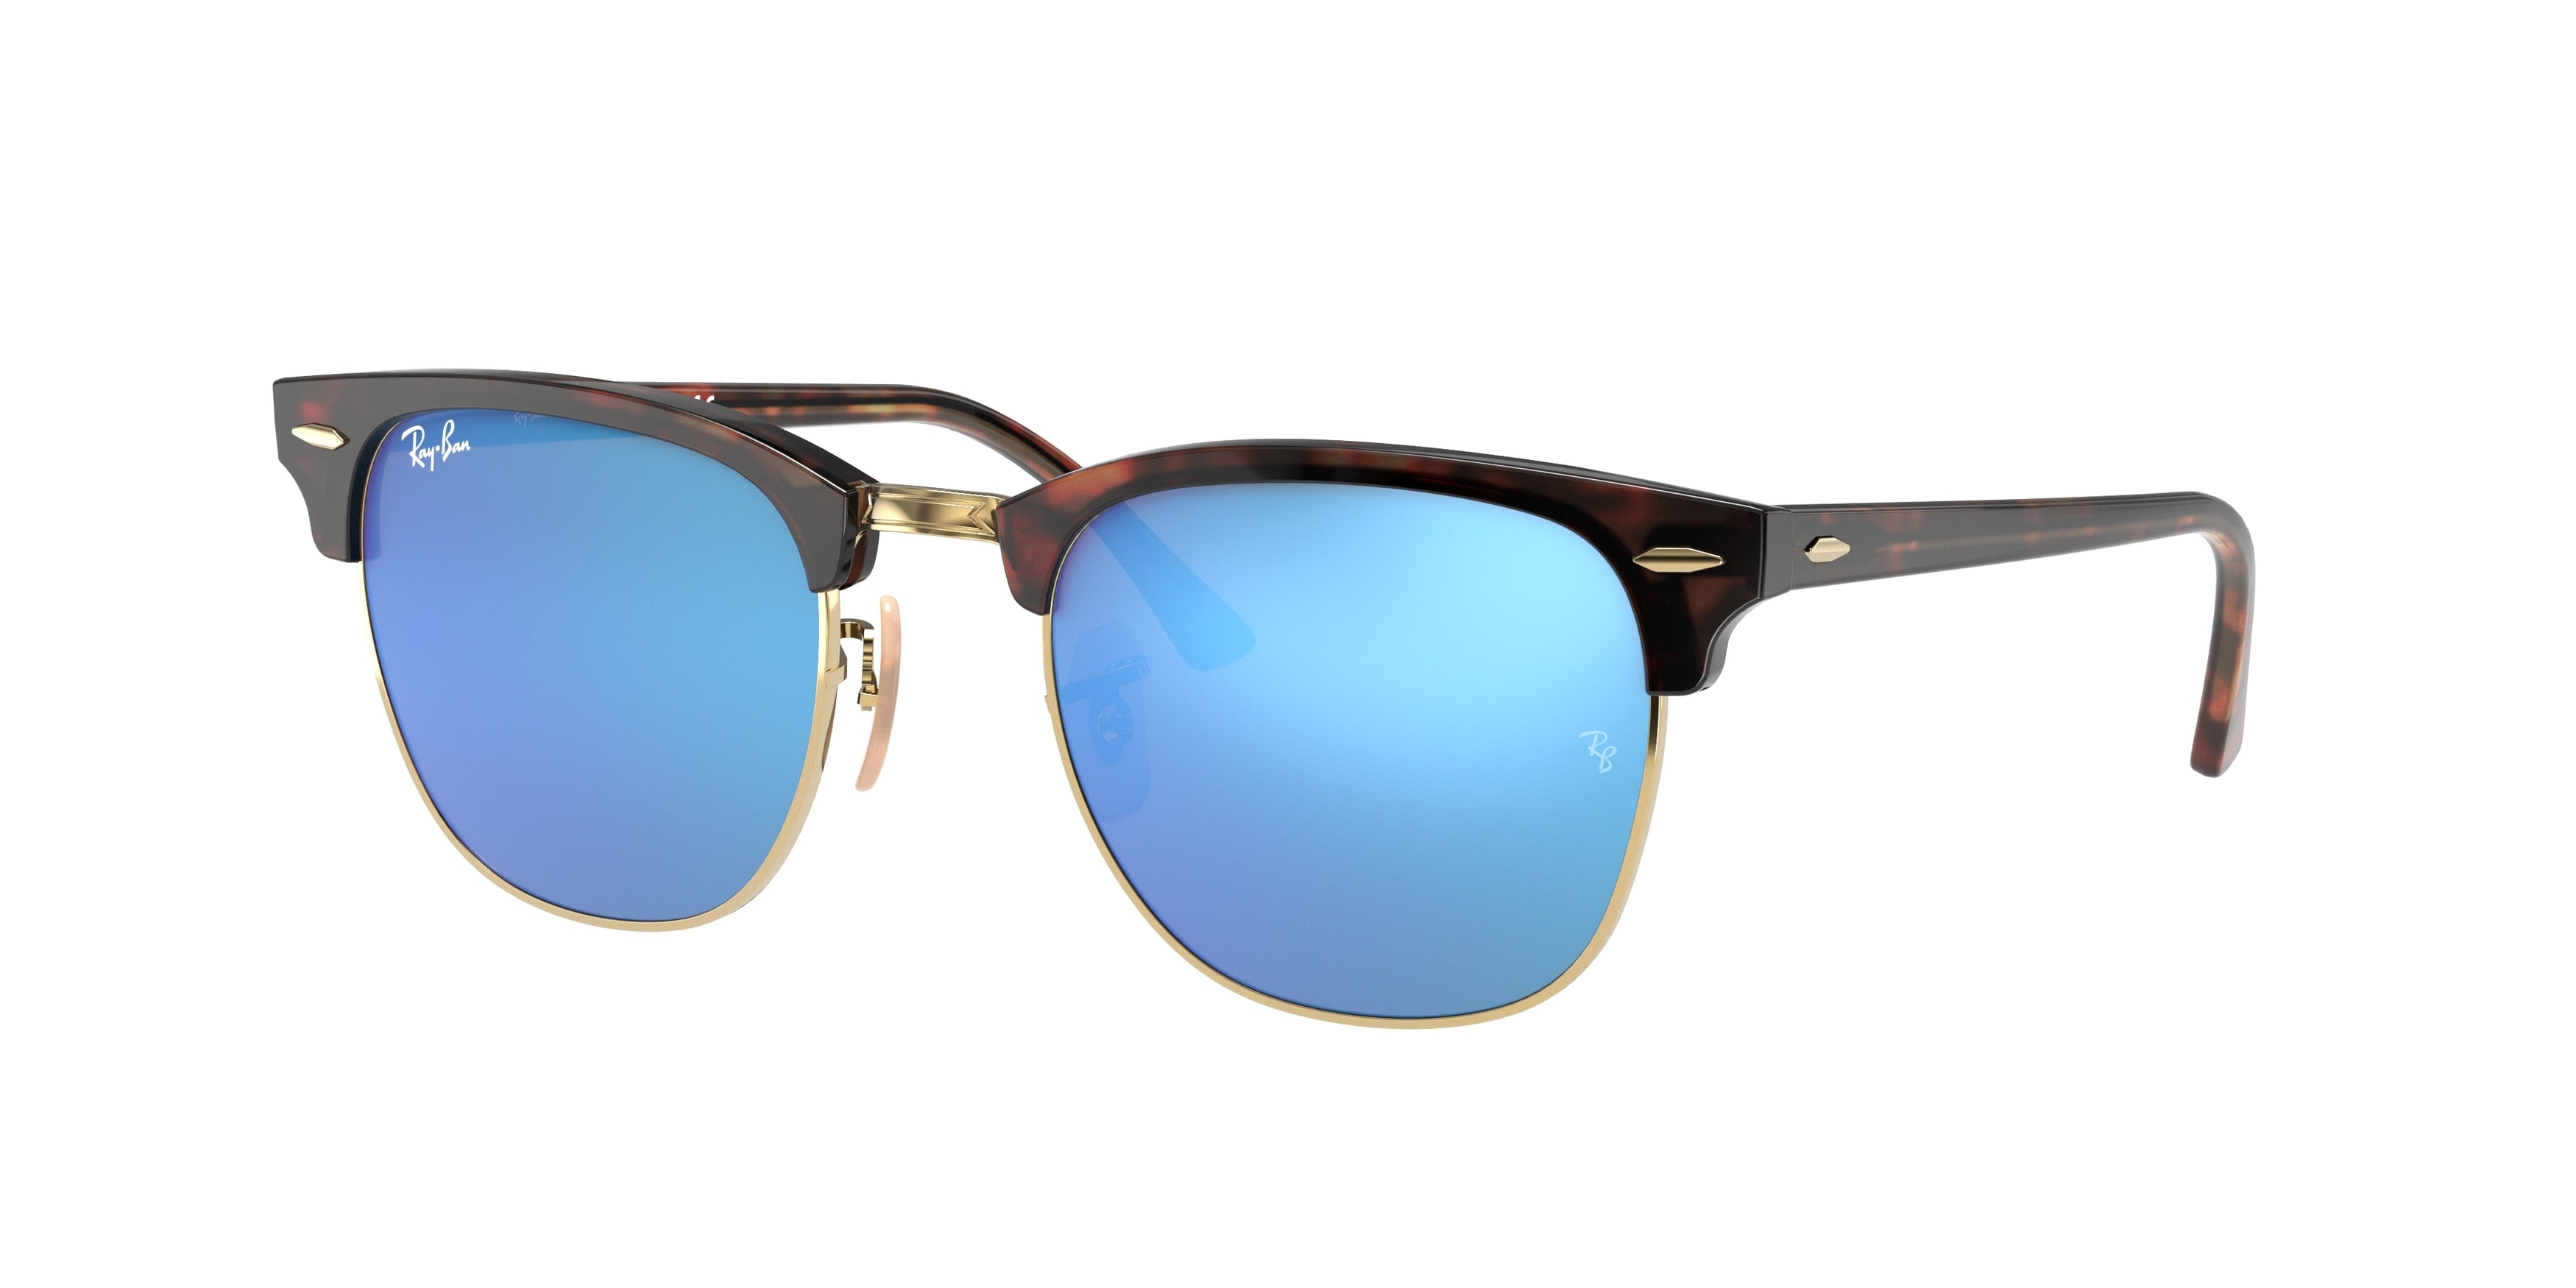 Ray-Ban CLUBMASTER RB3016 Square Sunglasses  114517-Havana On Gold 50-145-21 - Color Map Tortoise